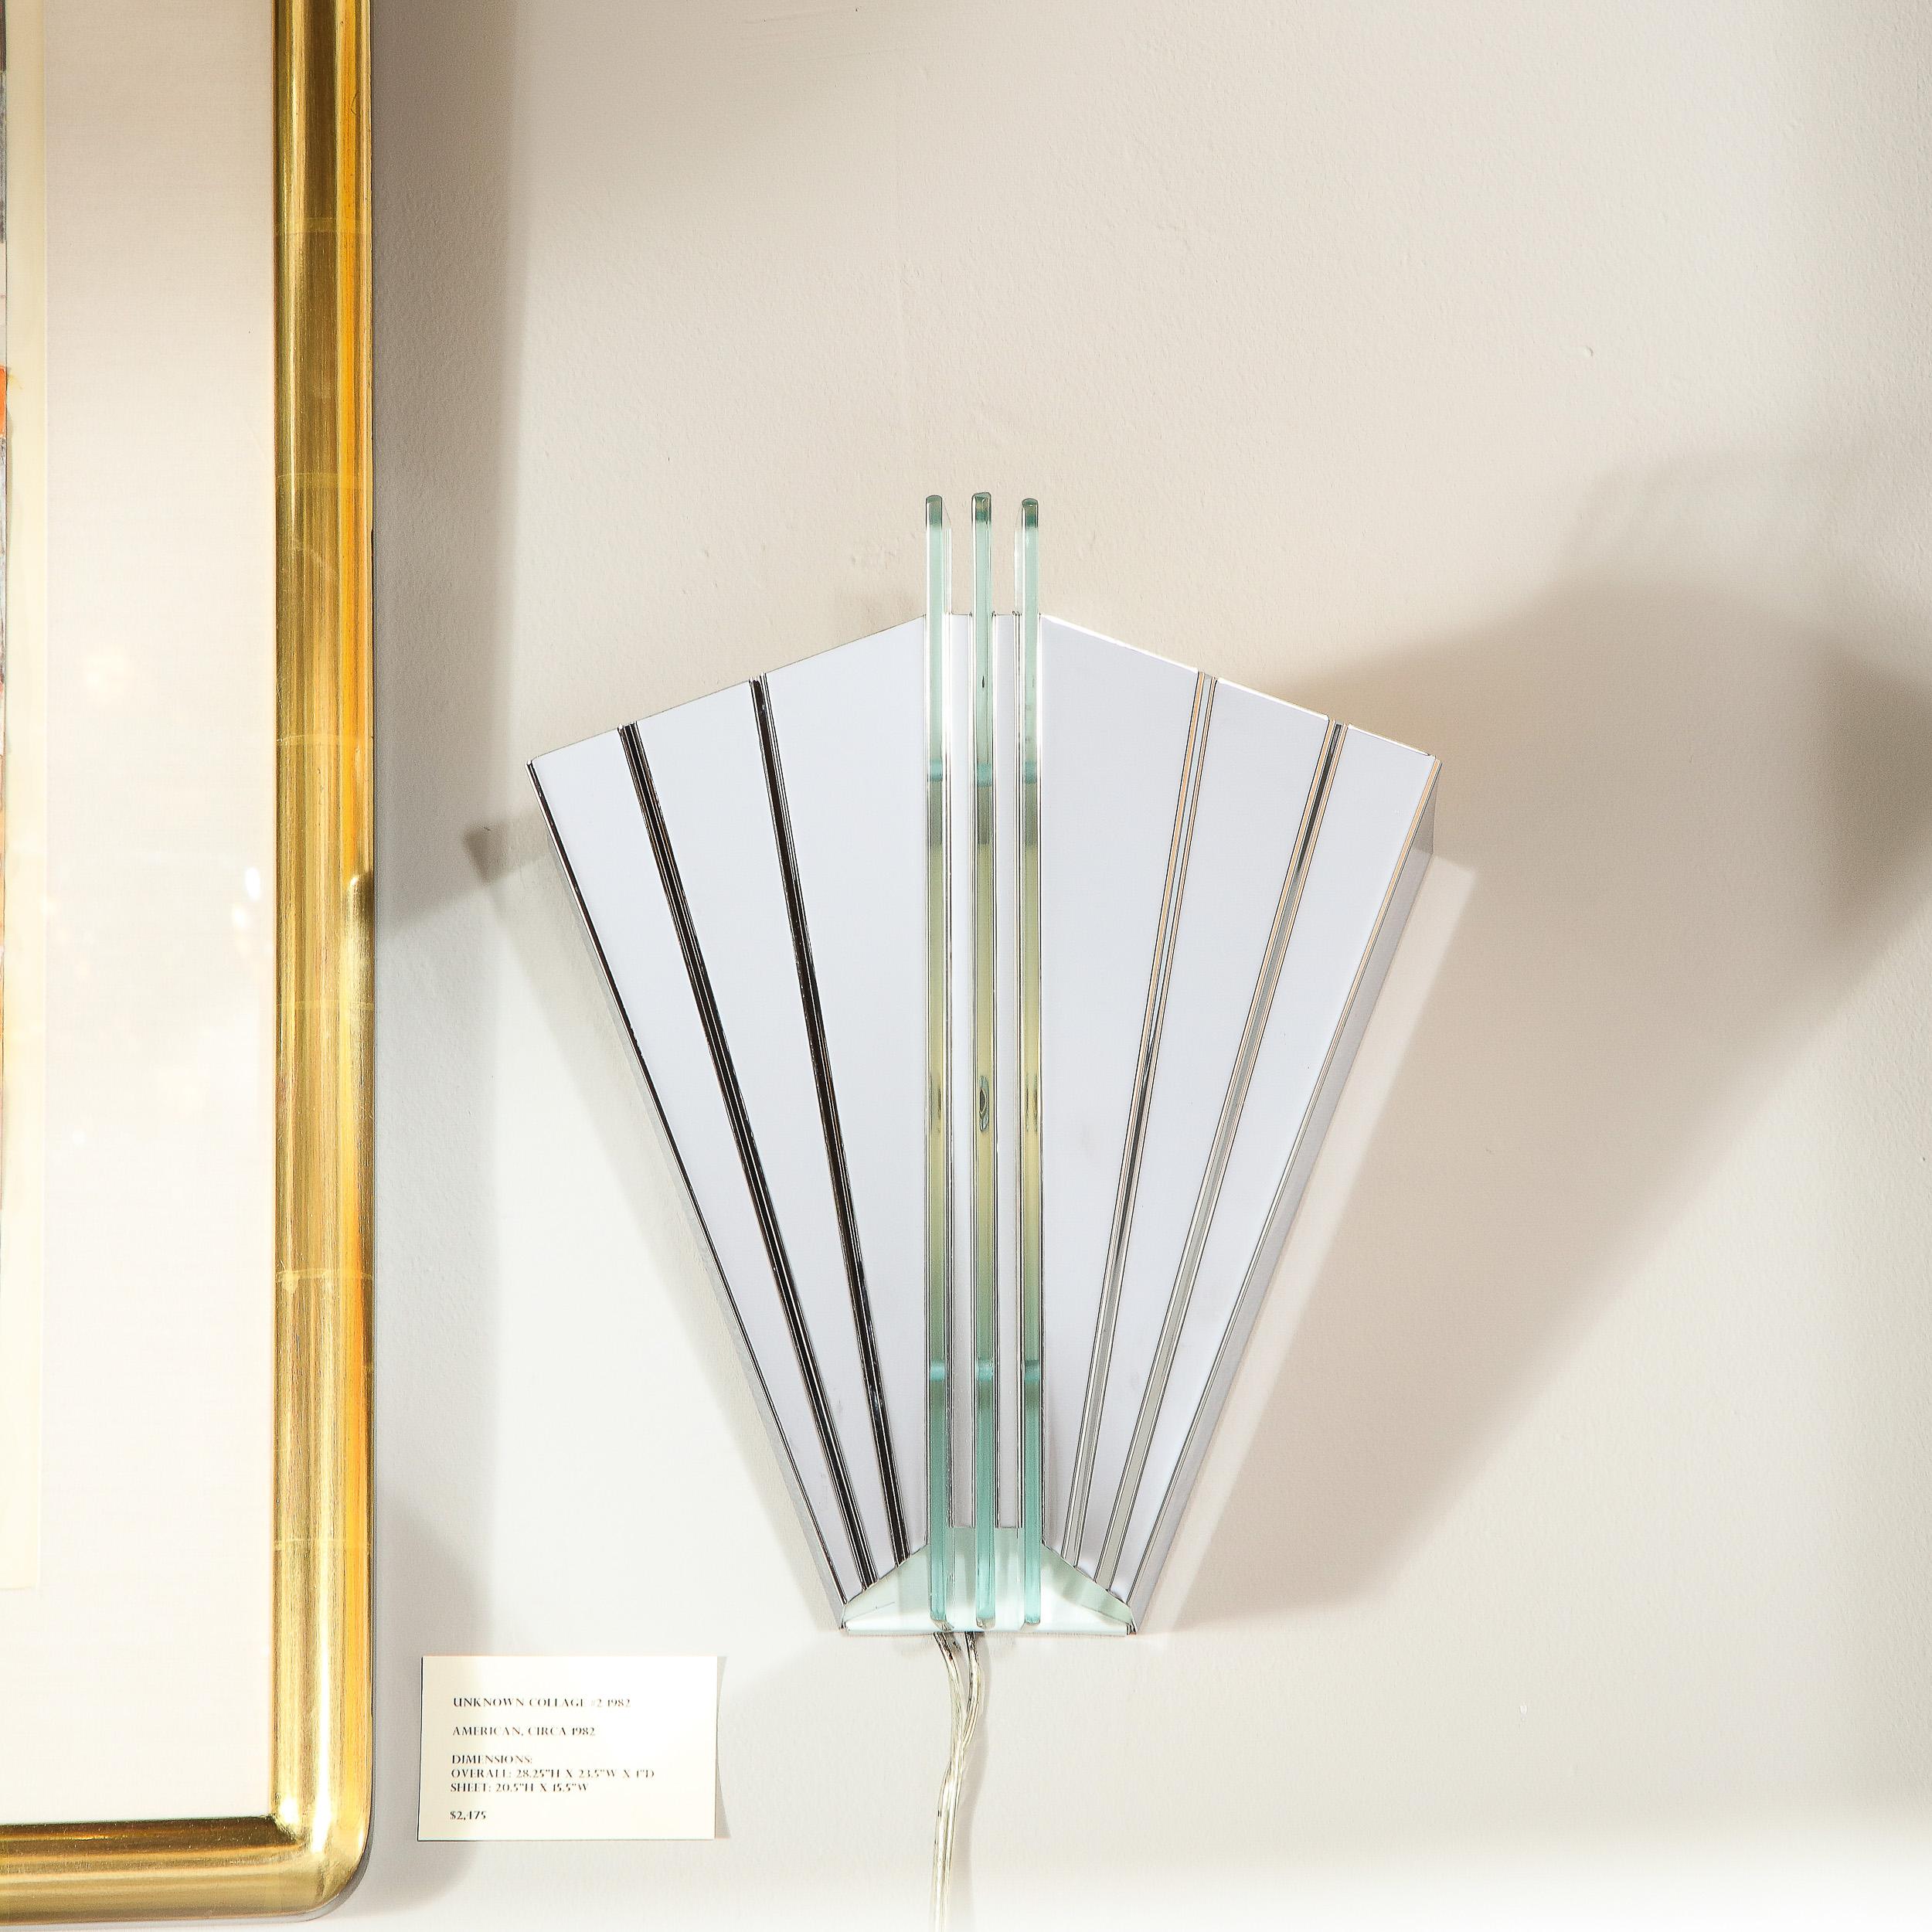 American Pair of Art Deco Skyscraper Style Polished Chrome & Glass Fan Sconces